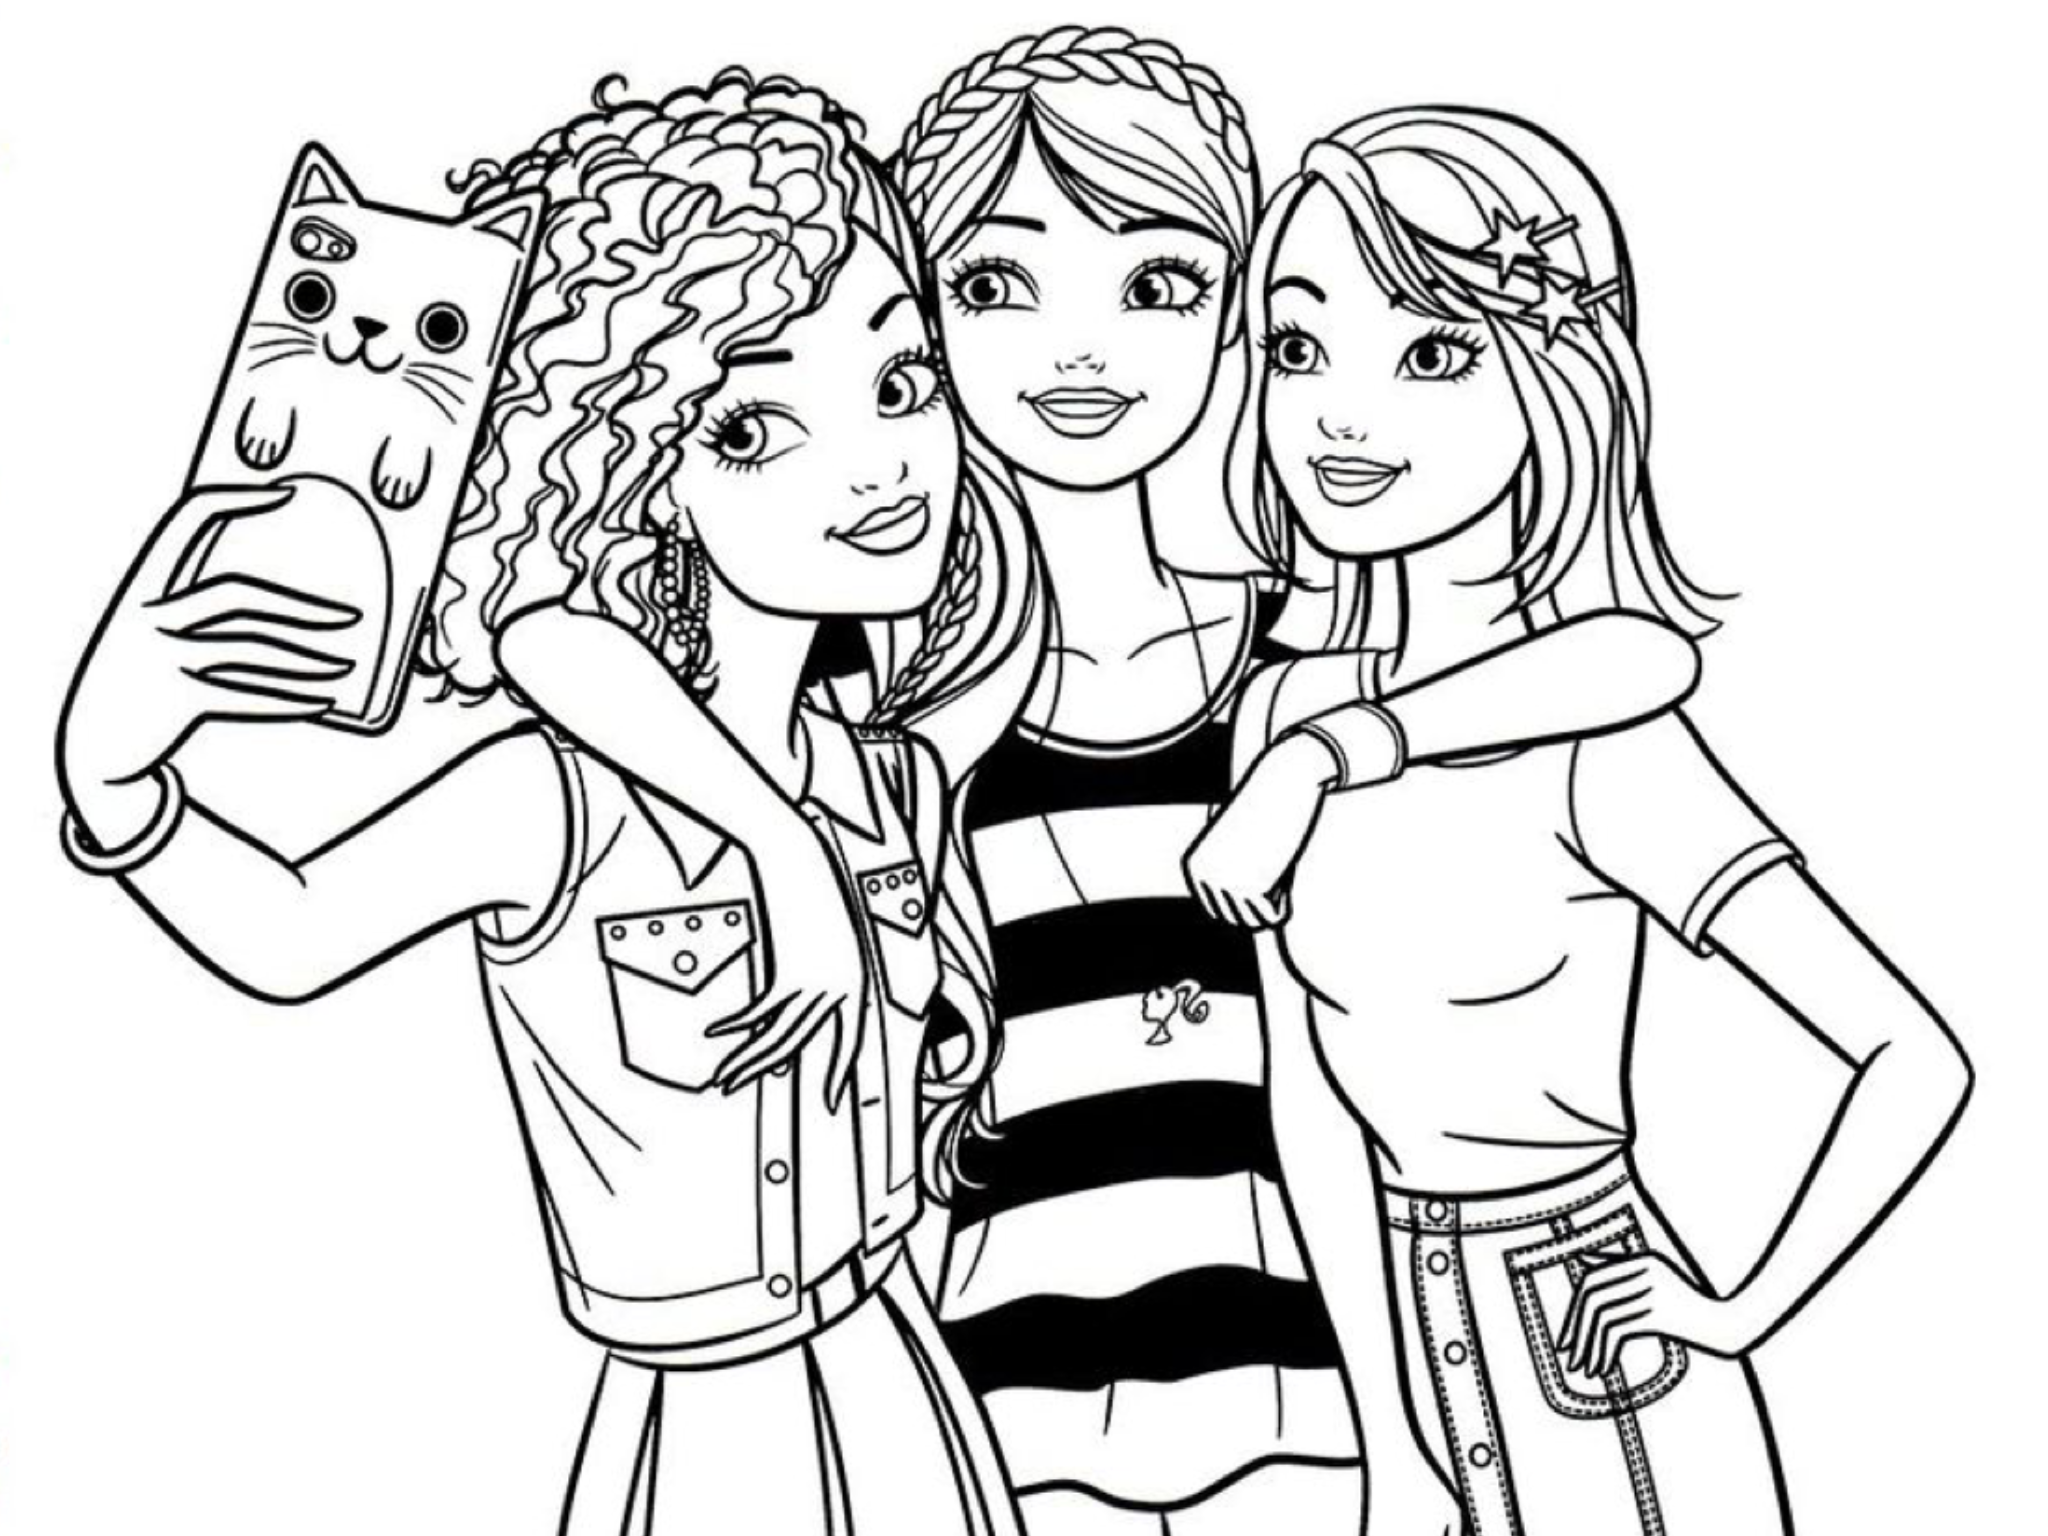 printable bff coloring pages